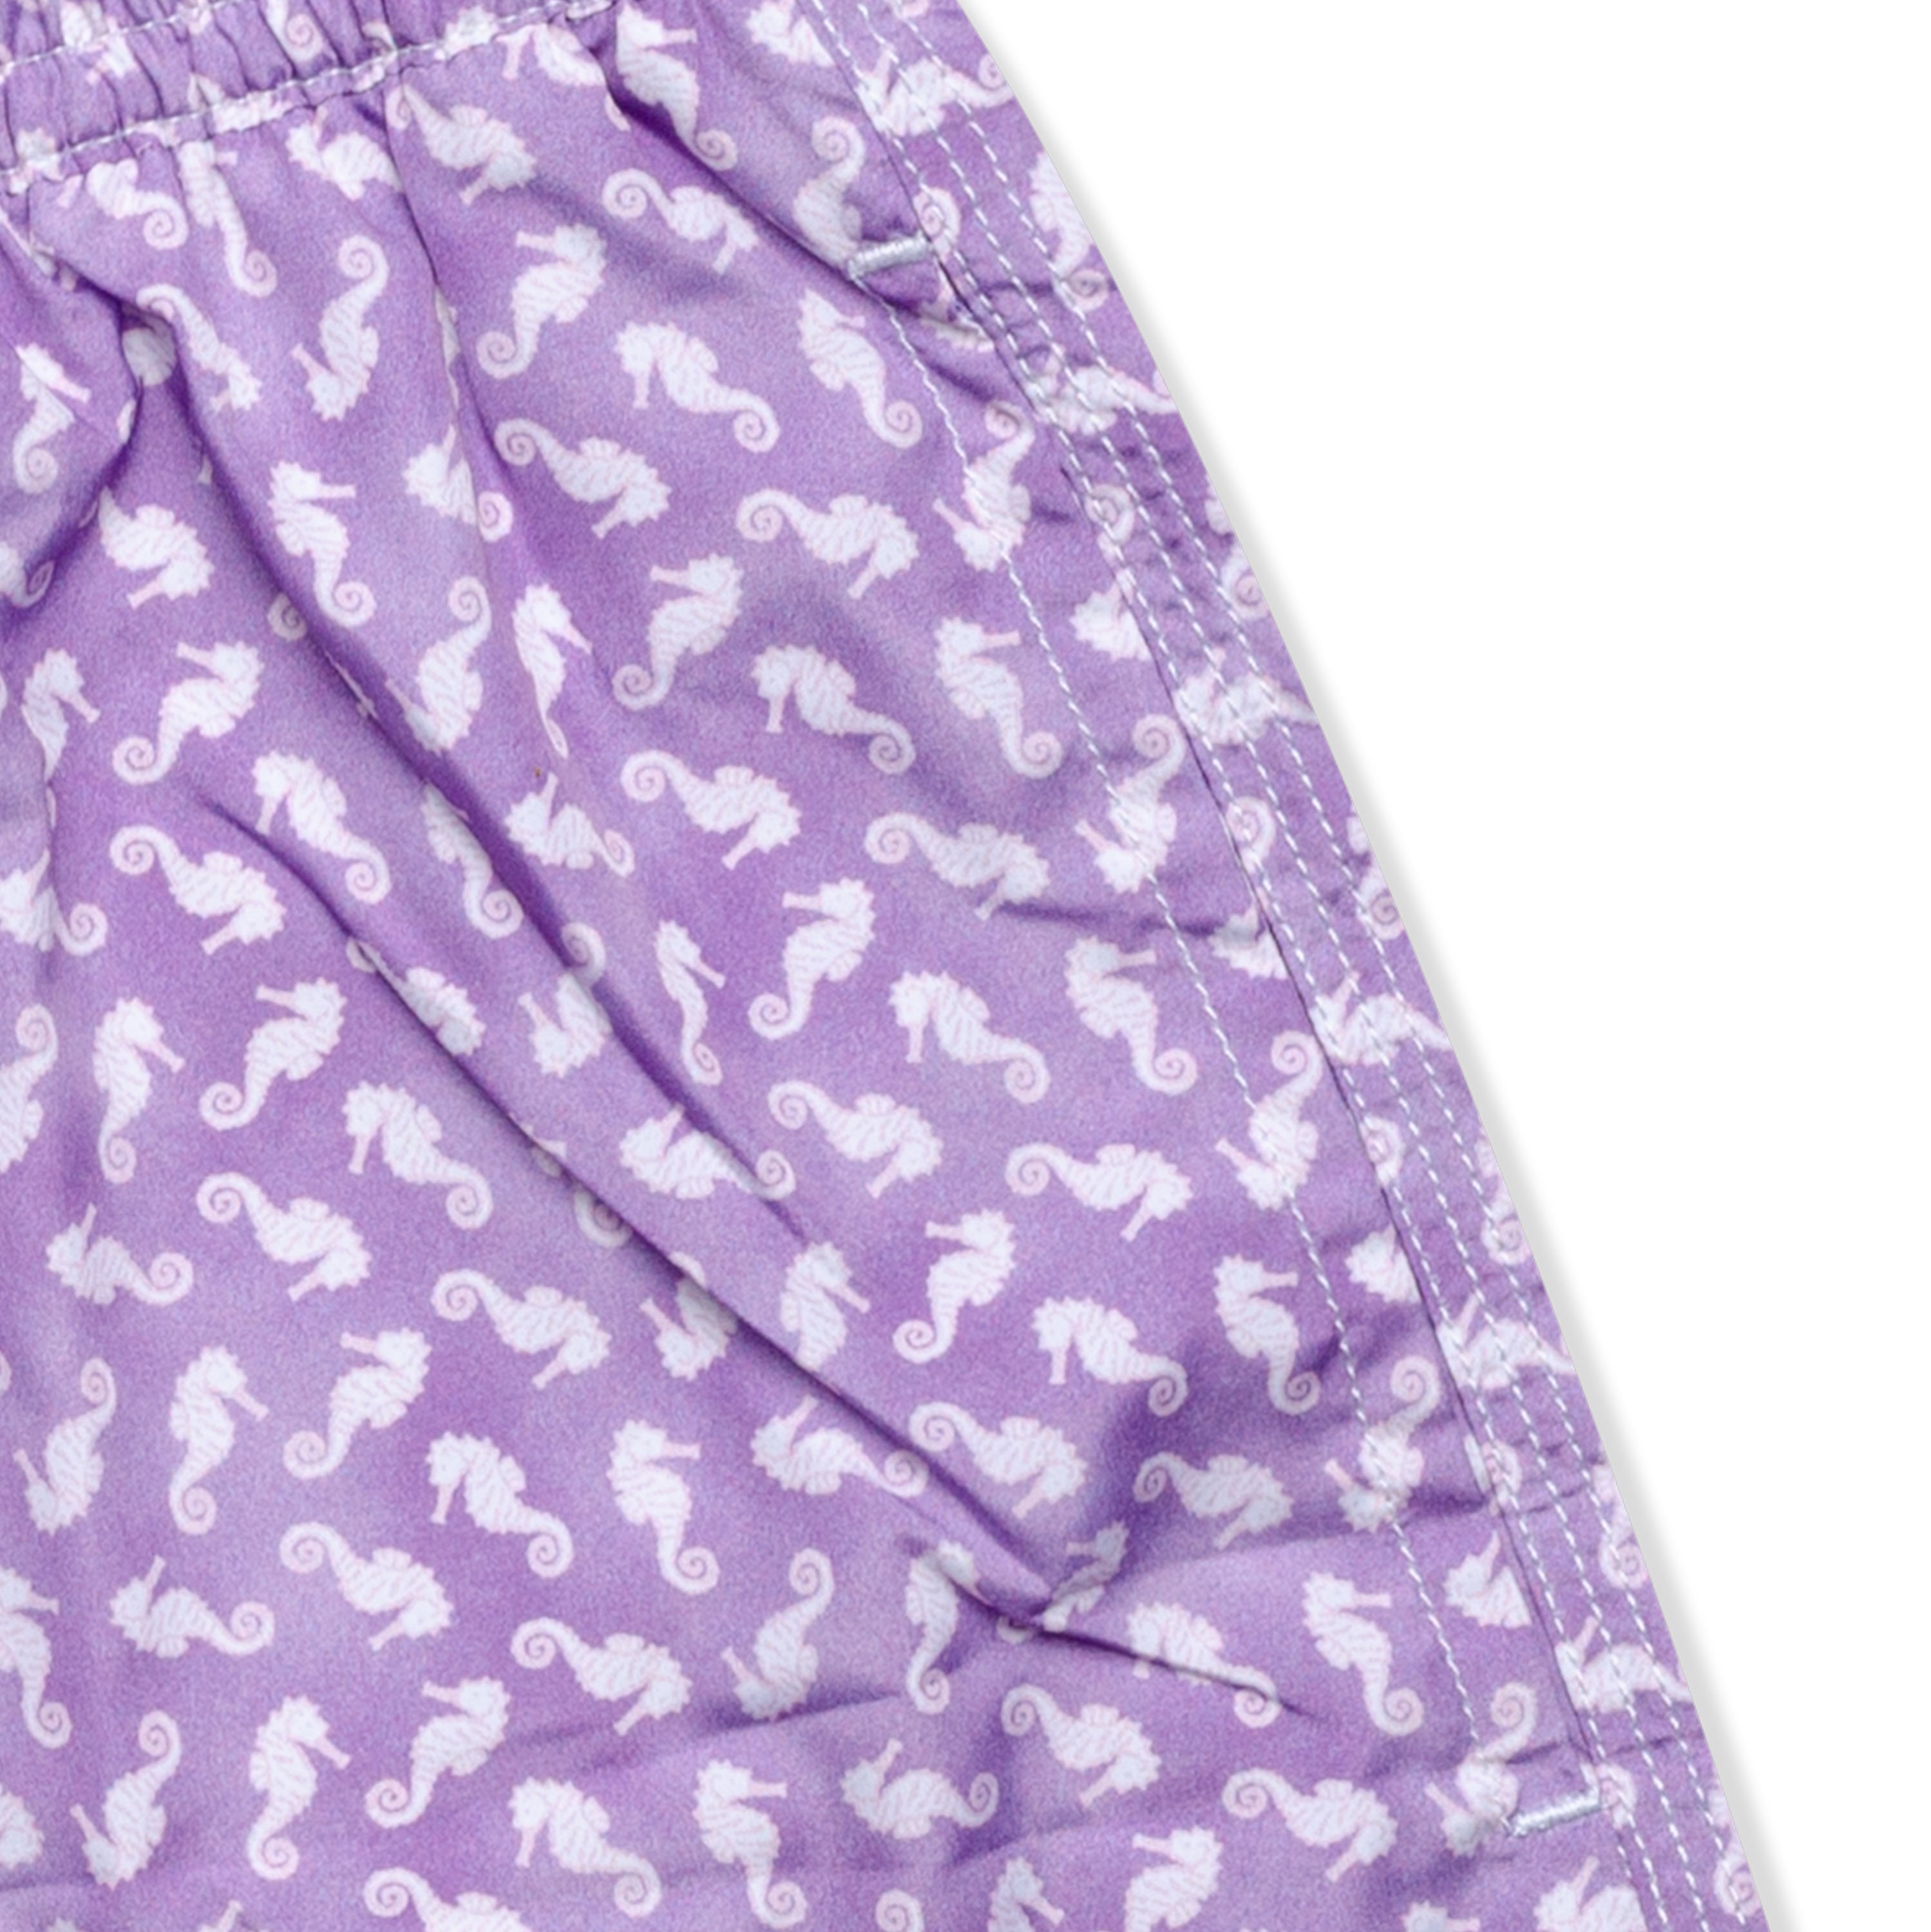 FEDELI Made in Italy Purple Seahorses Madeira Airstop Swim Shorts Trunks NEW